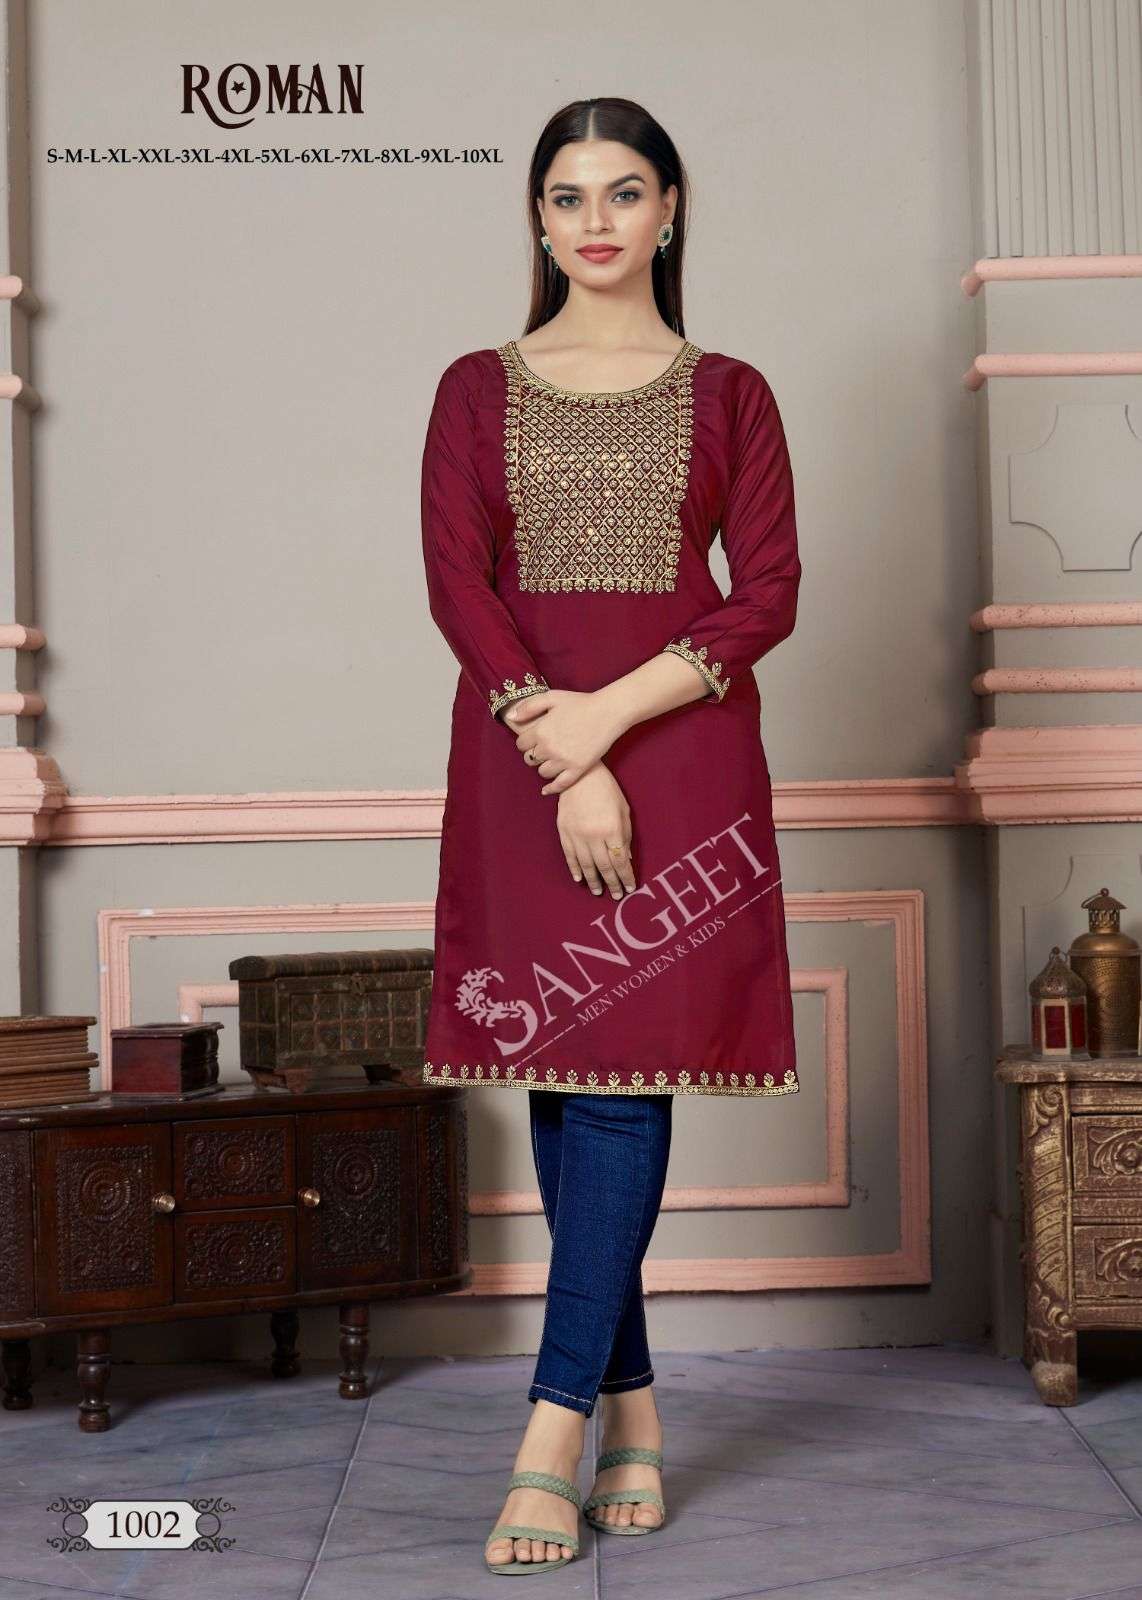 ROMAN ROMAN SILK GOLD EMBROIDERY SEQUENCE WORK SHORT KURTI BY S3FOREVER BRAND WHOLESALER AND DEALER